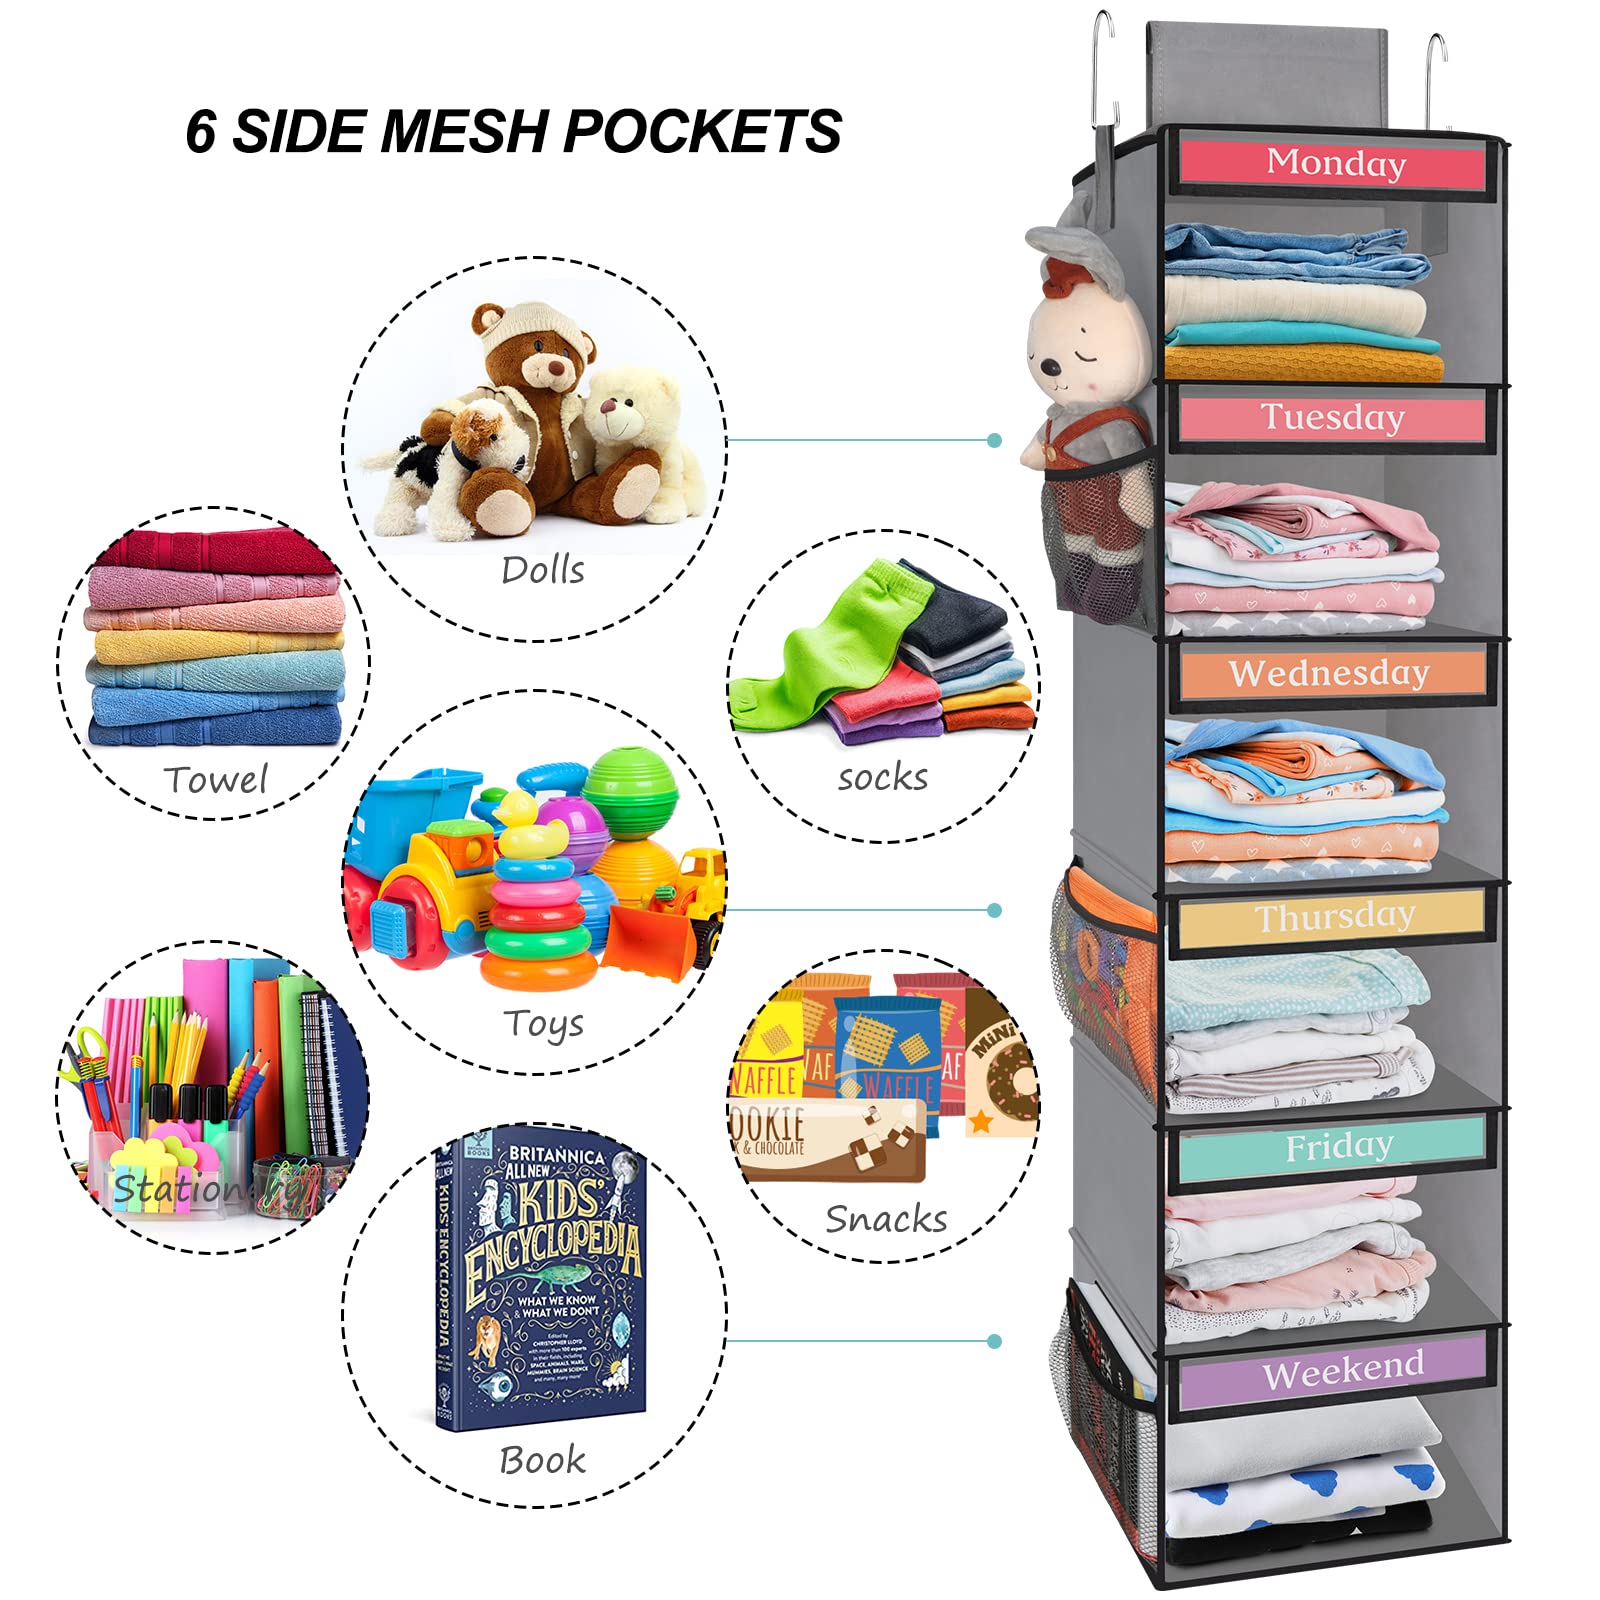 Fixwal 6-Shelf Weekly Hanging Closet Organizer for Kids with 6 Side Pockets, Weekday Kids Clothes Organizers Monday Through Friday Clothes Foldable Hanging Storage Shelves (Grey)